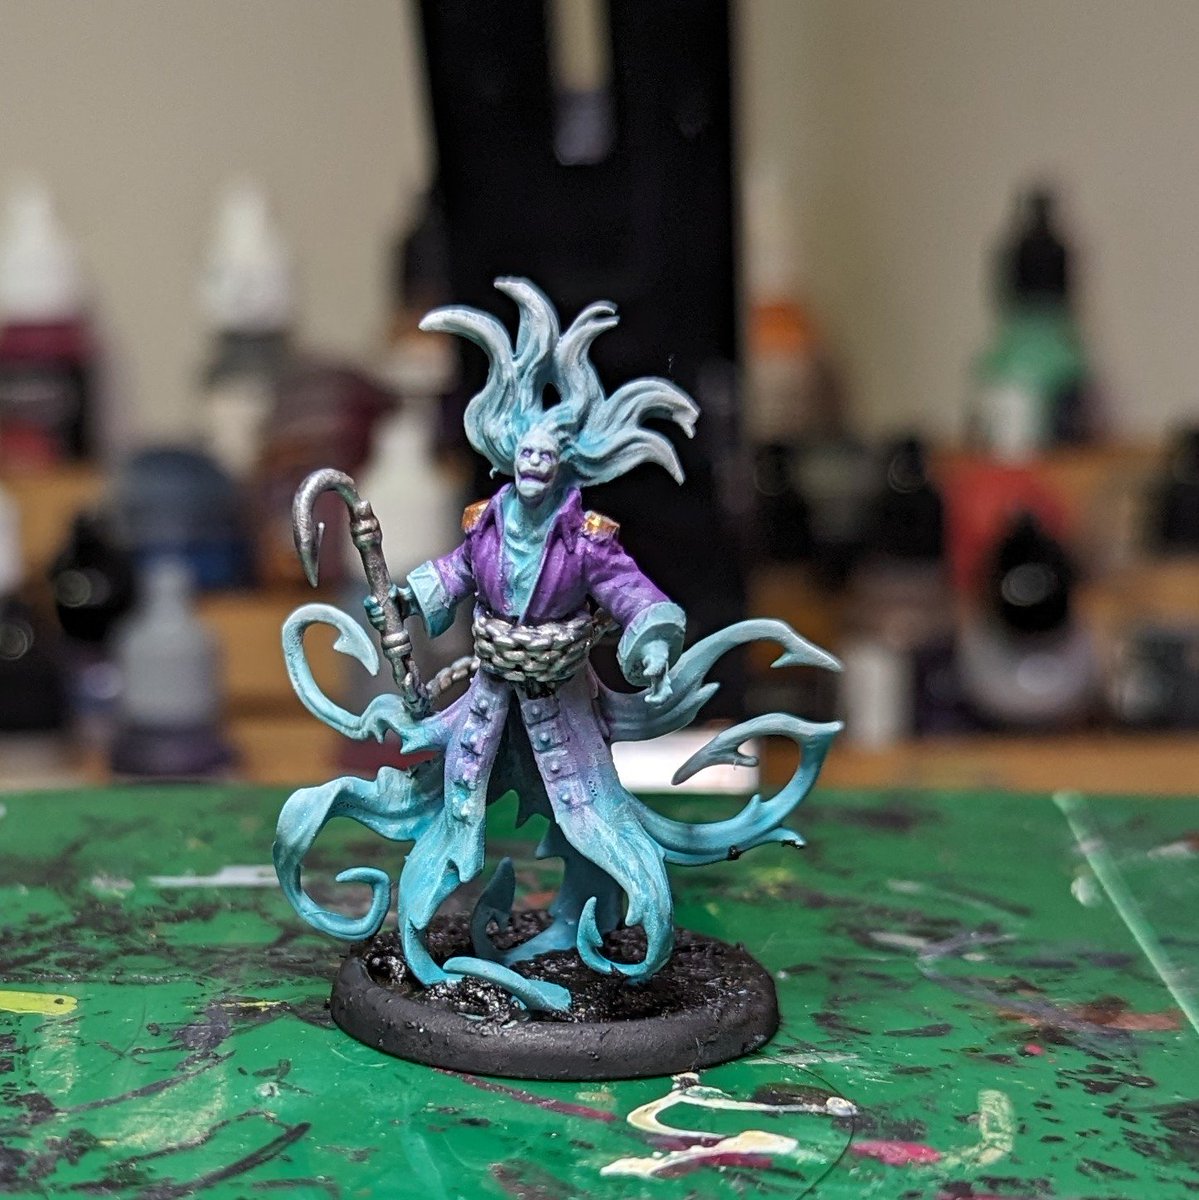 Working on a #malifaux model, Kari  Zotiko. Kari apparently used to fish cadavers out of the rivers of Malifaux to sell to Resurrectionists.

That earned them an early grave and a swift return as a vengeful spirit.